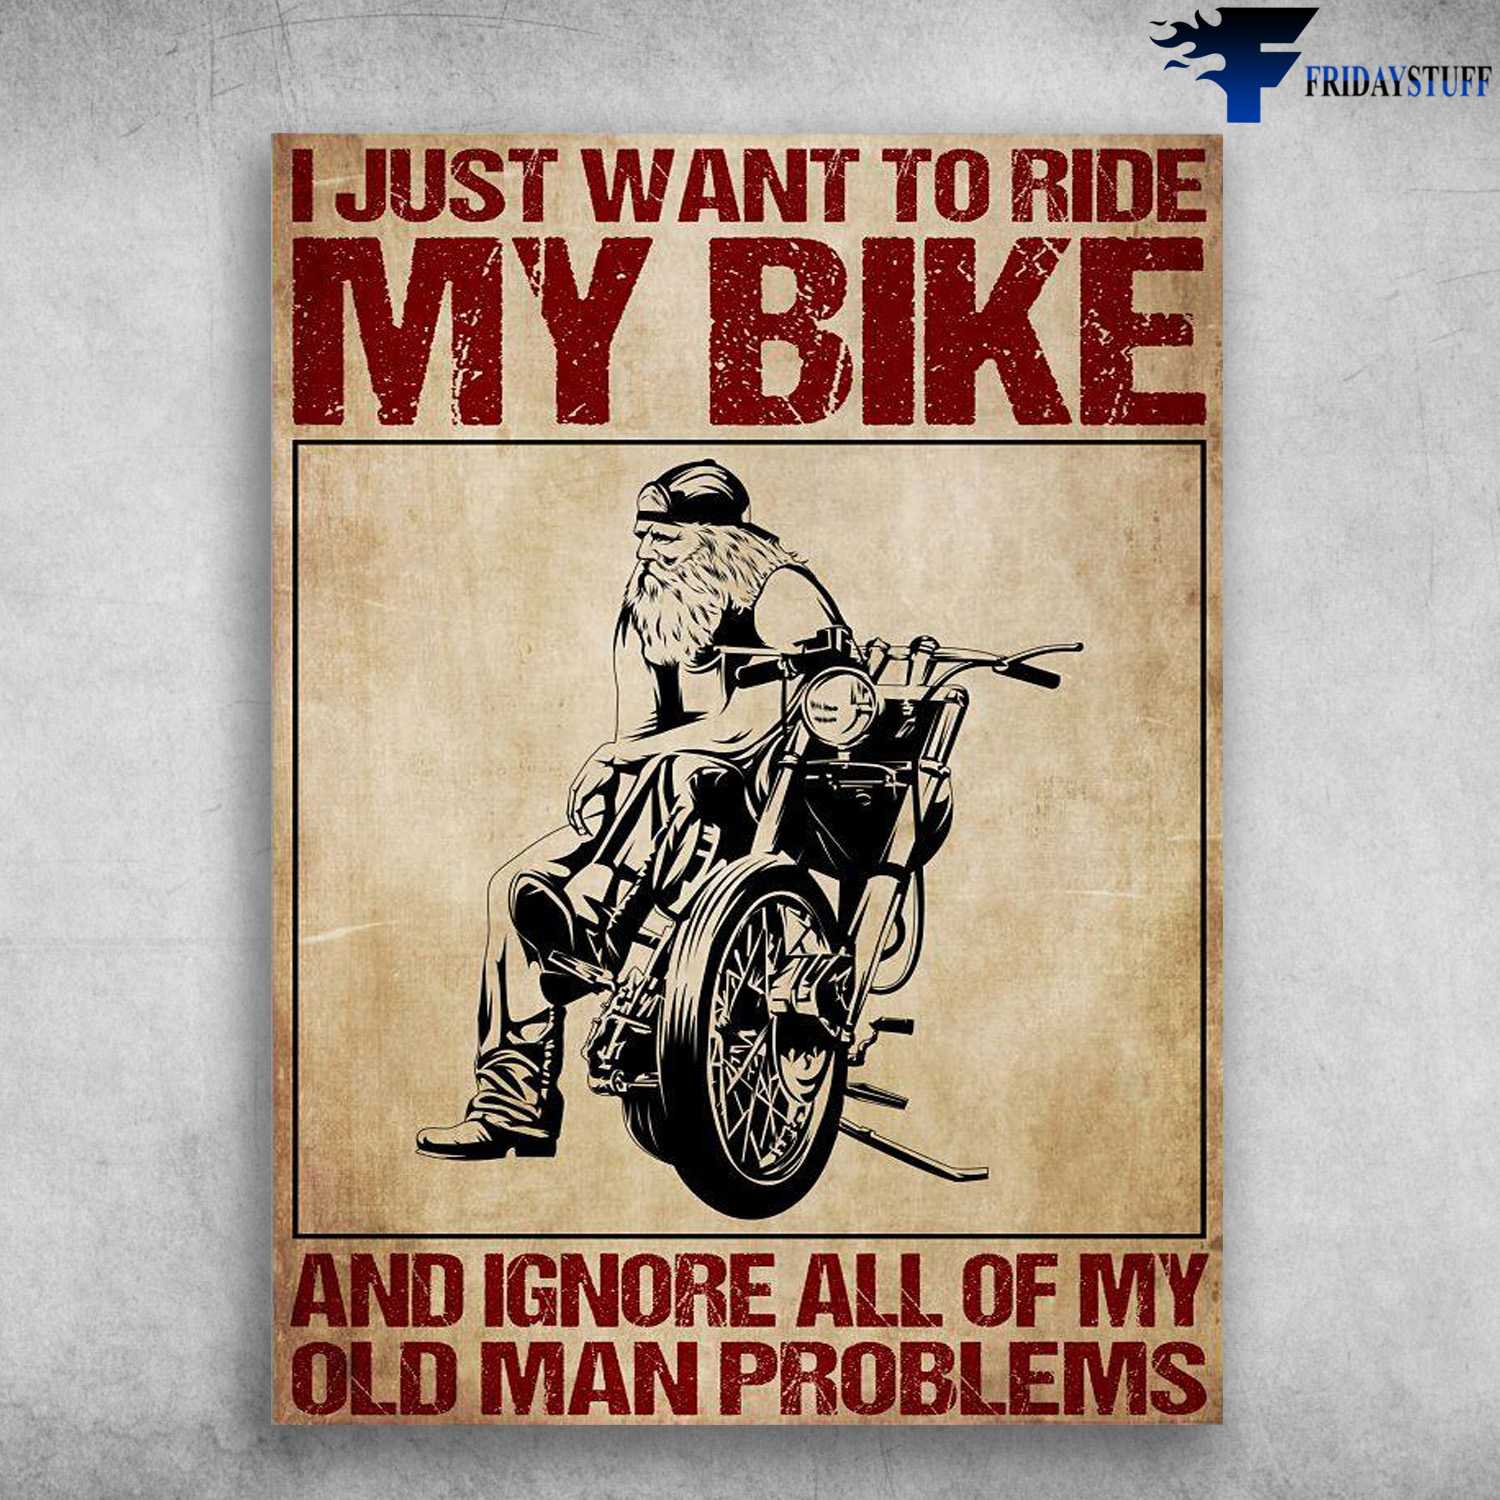 Old Biker, Old Man Riding, Motorcycle Man, I Just Want To Ride My Bike, And Ignore All Of My Old Man Problems